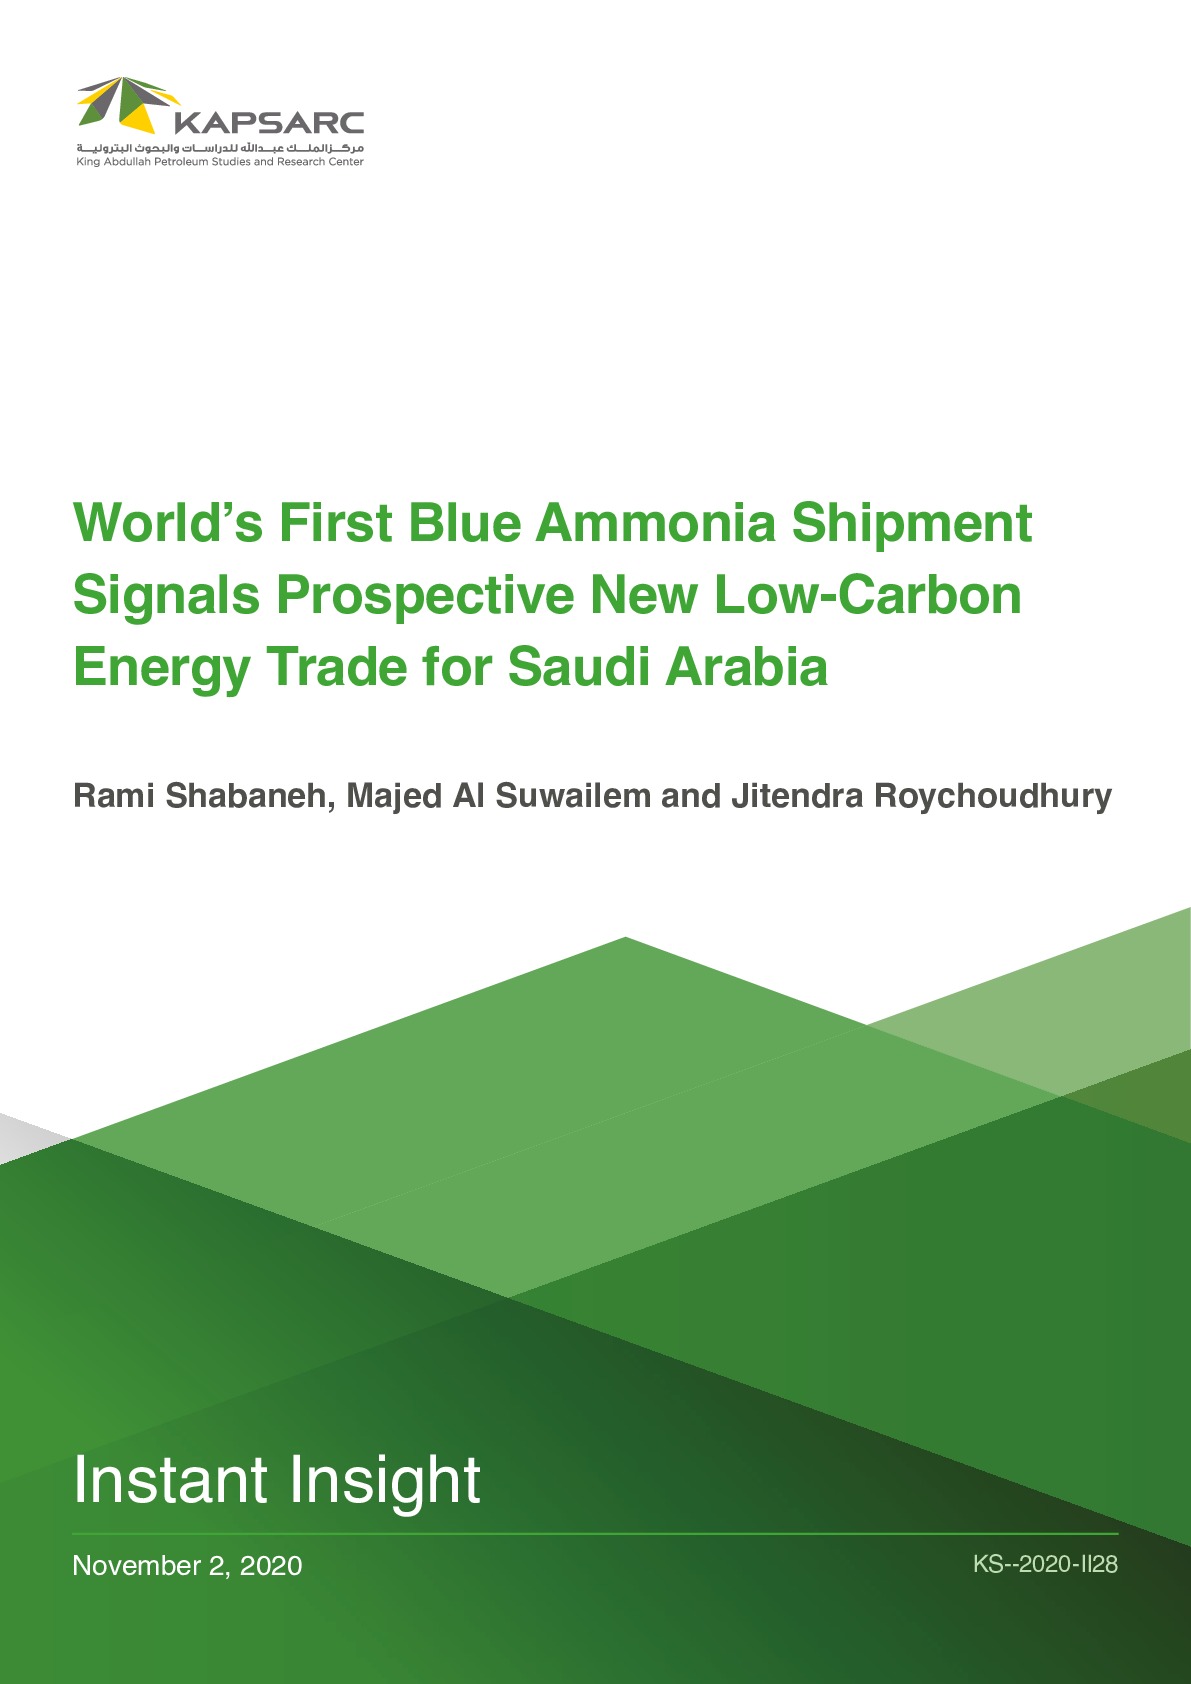 World’s First Blue Ammonia Shipment Signals Prospective New Low-Carbon Energy Trade for Saudi Arabia